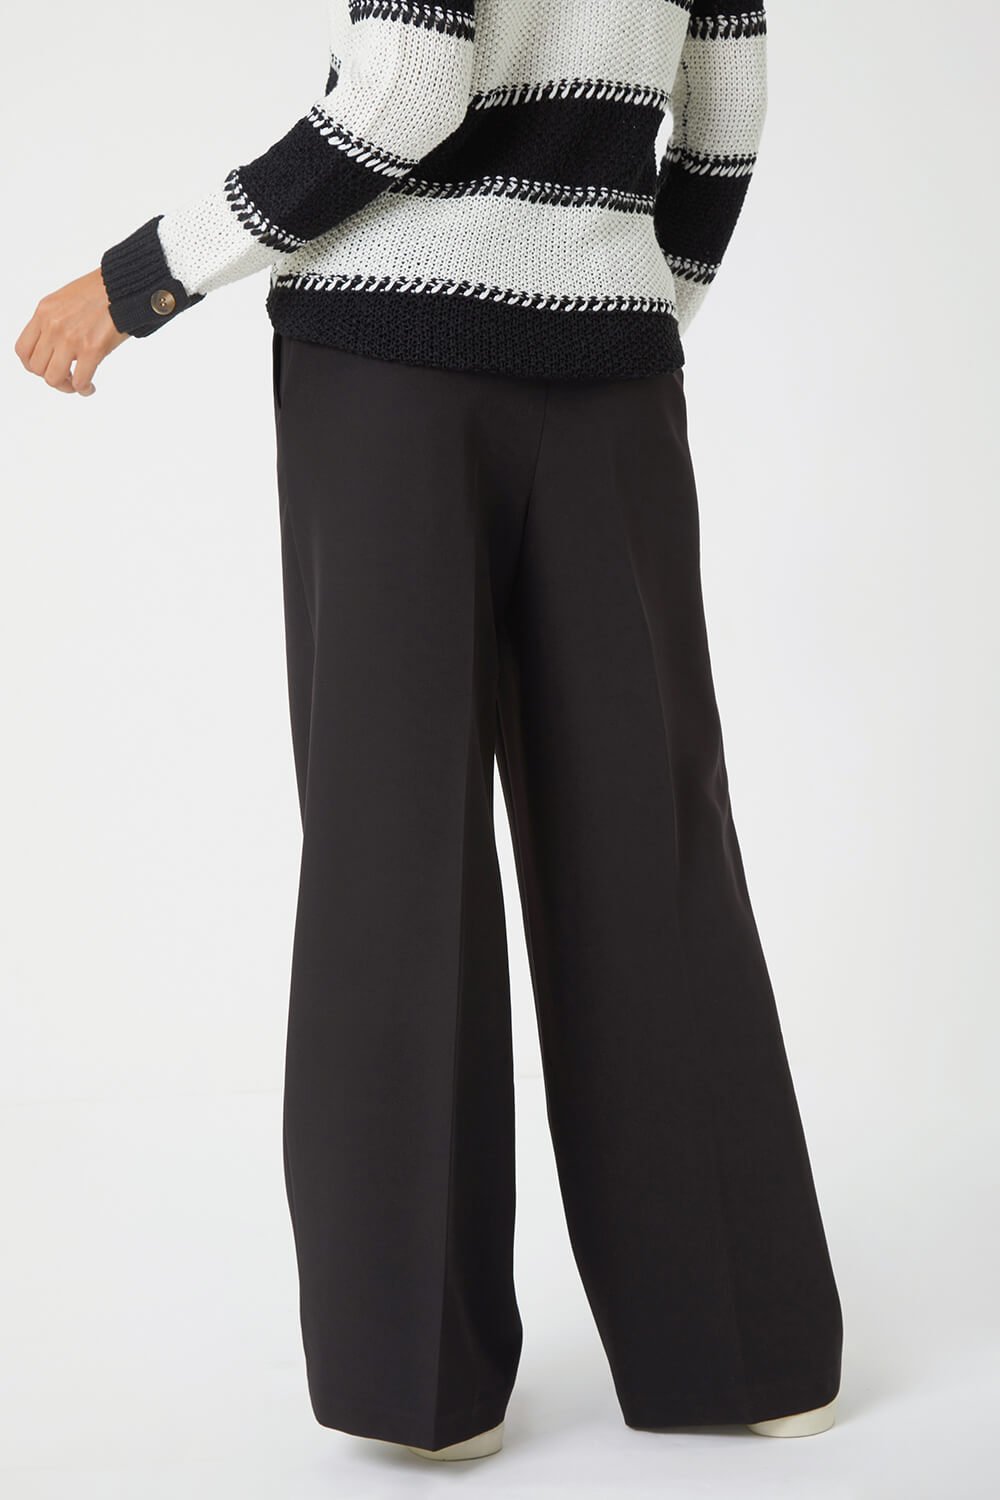 Black Wide Leg Tie Front Stretch Trouser, Image 3 of 5